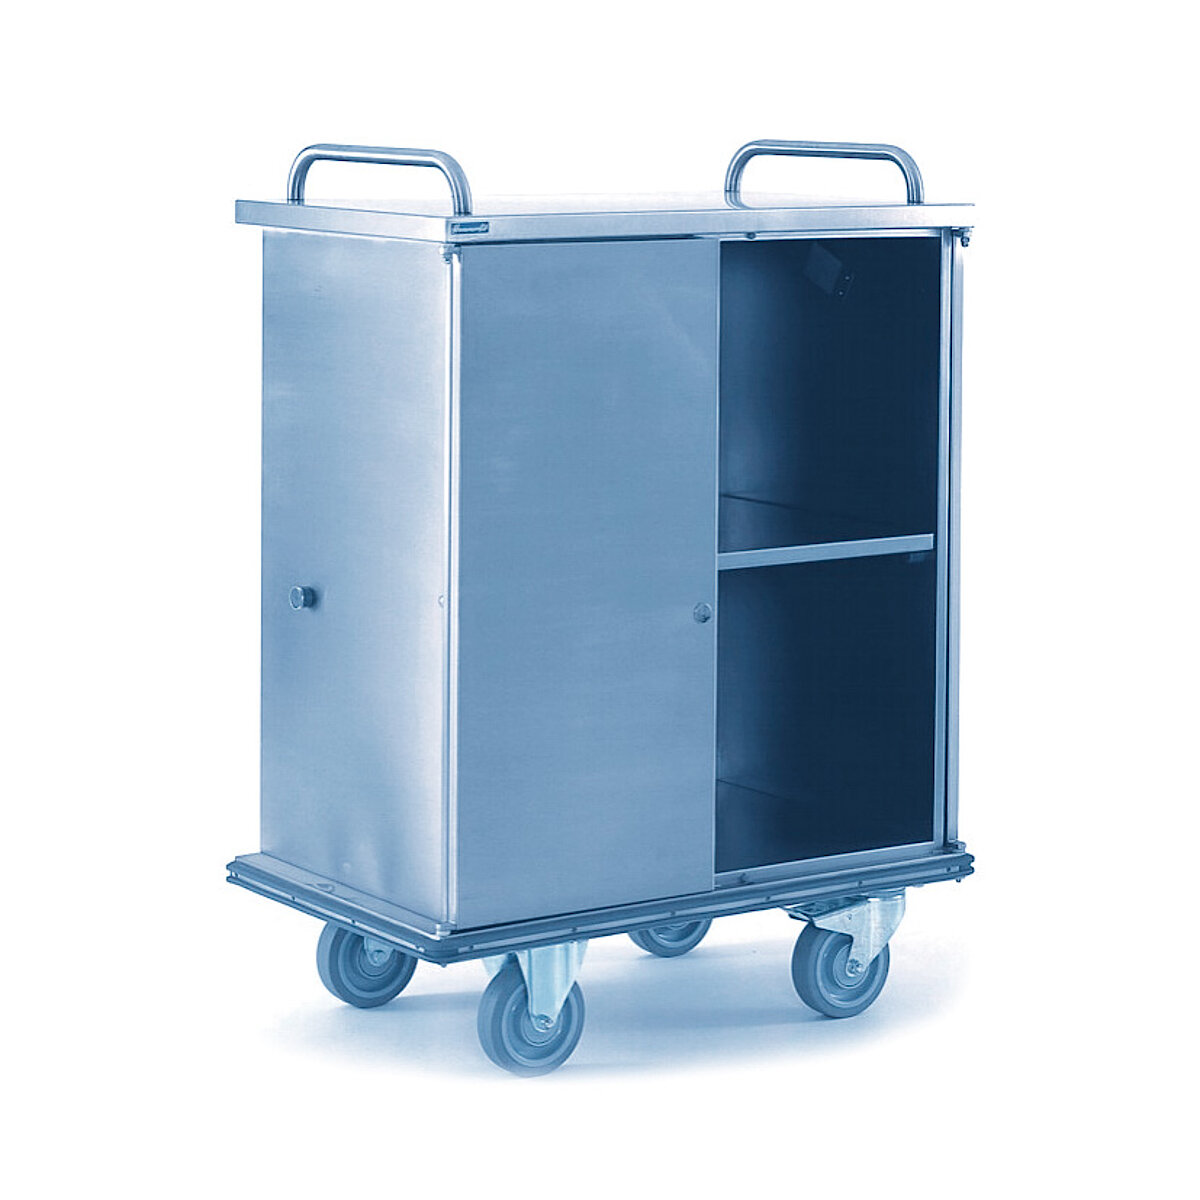 Cleanroom cupboard trolley made of stainless steel with 2 wing doors and castors